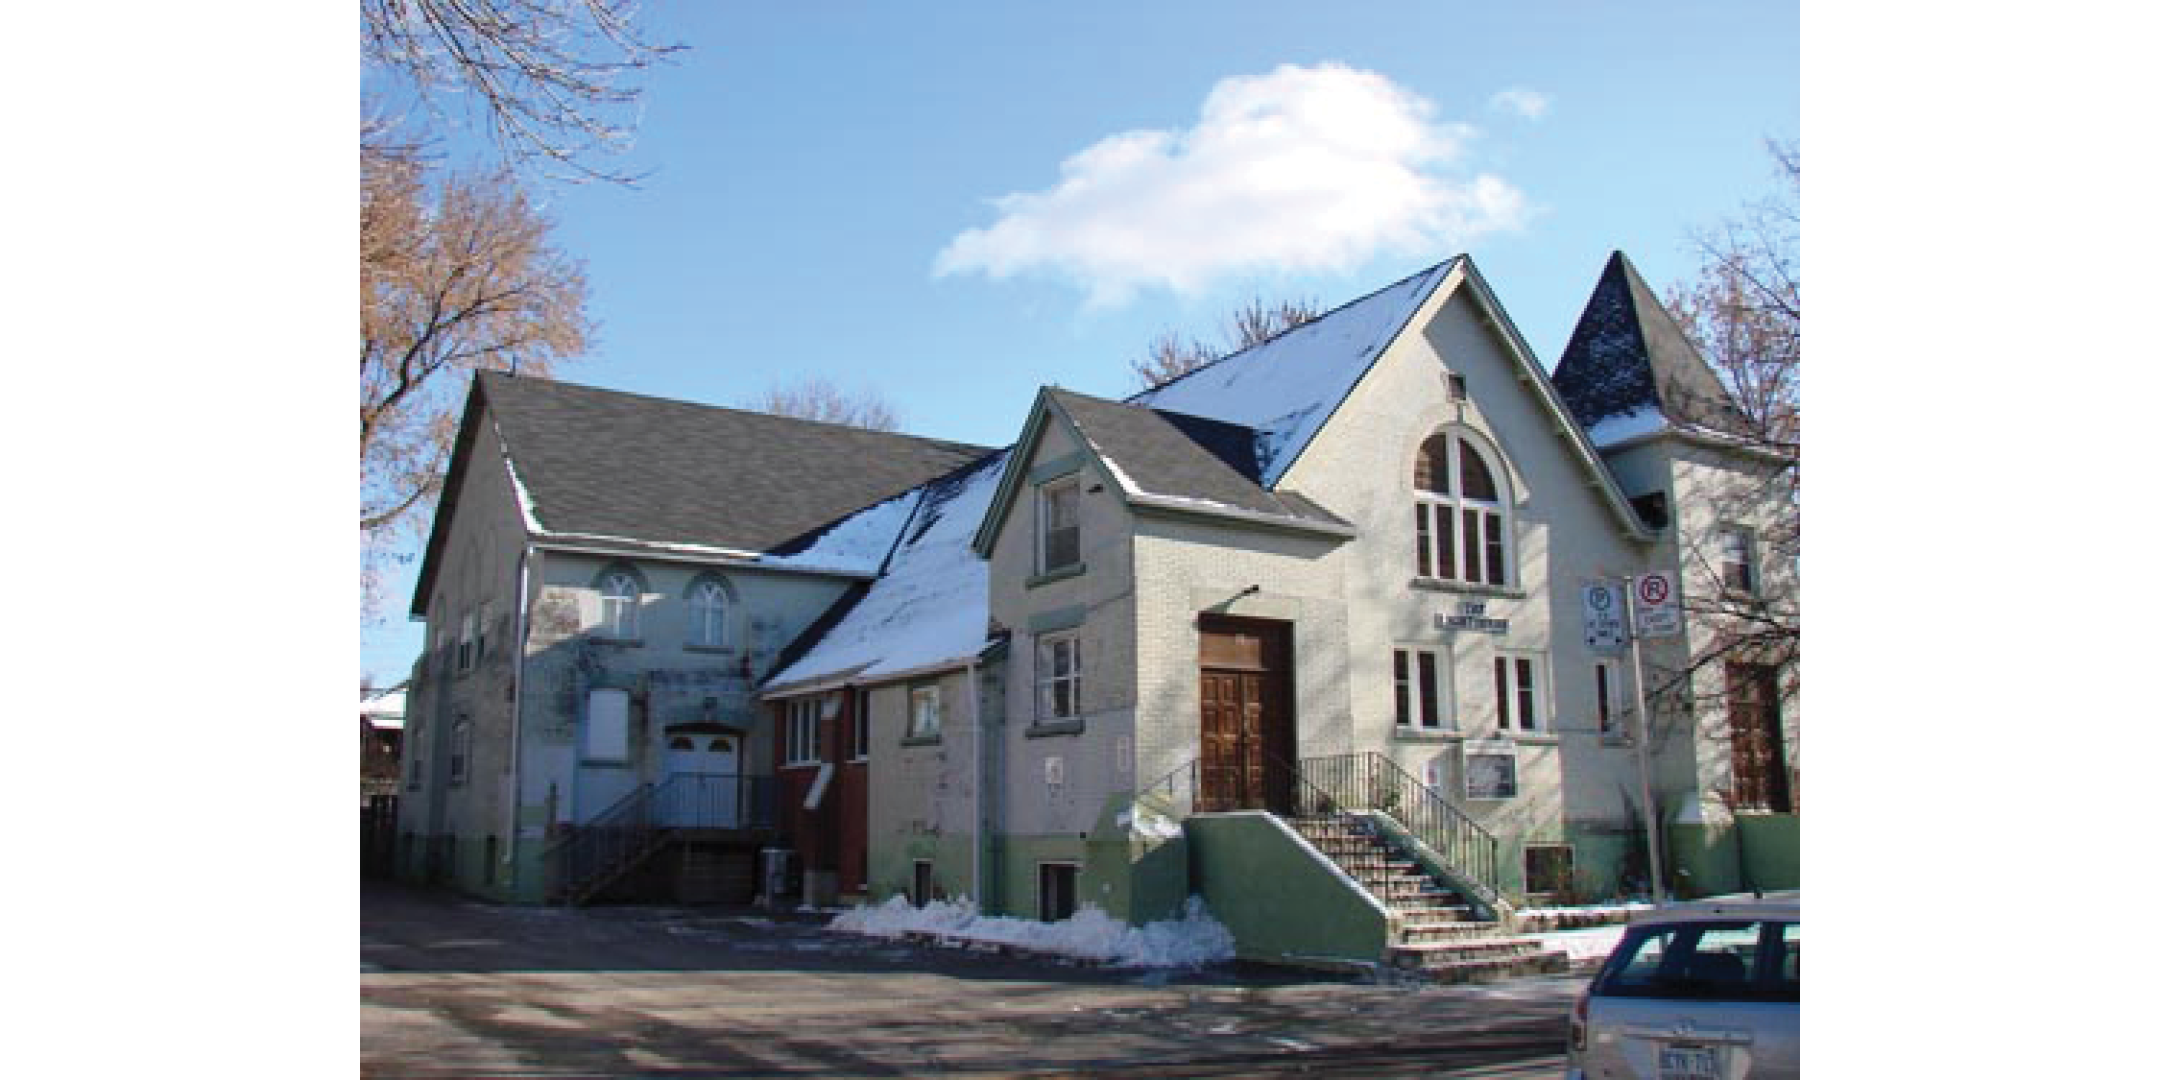 17 Rhodes Ave Current Building Front Full